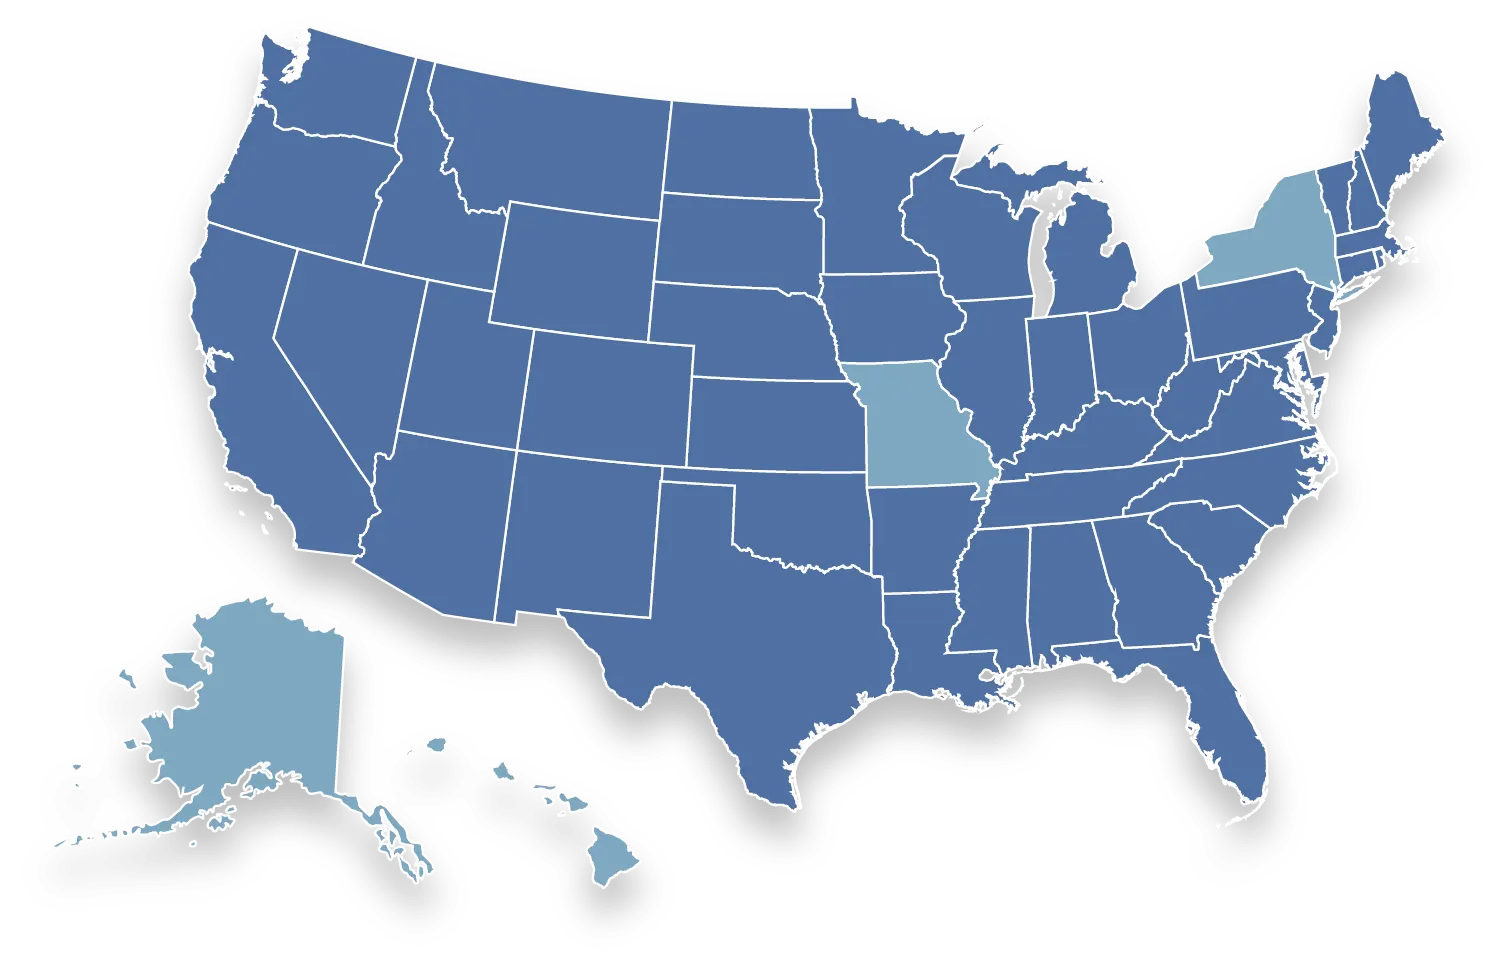 A map of the USA showing all the states being served by YourWayLoan.